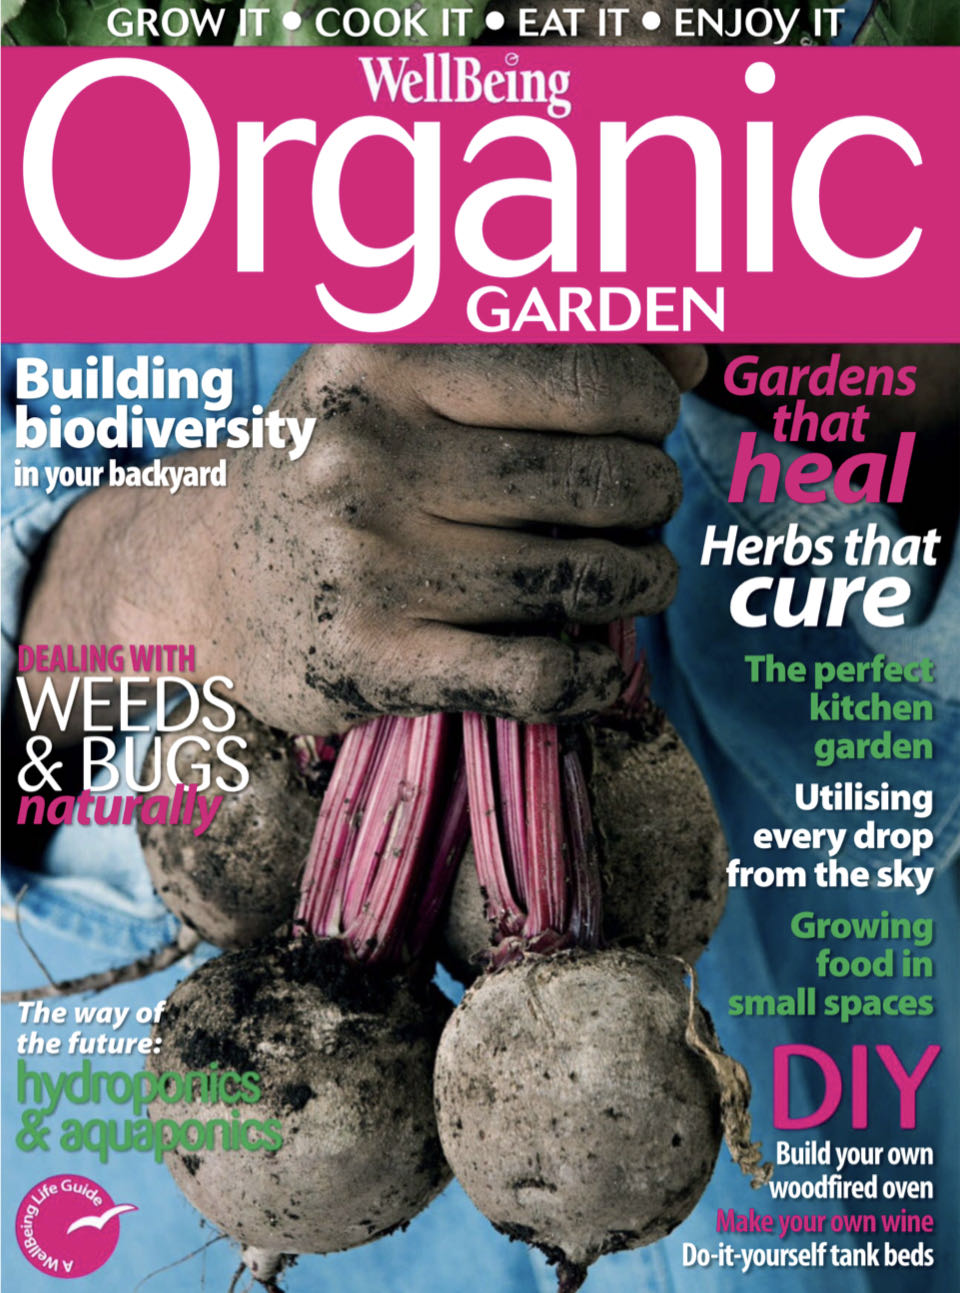 Wellbeing Organic Garden 2012 - Organic Special  2012 June  (June) magazine collectible - Main Image 1